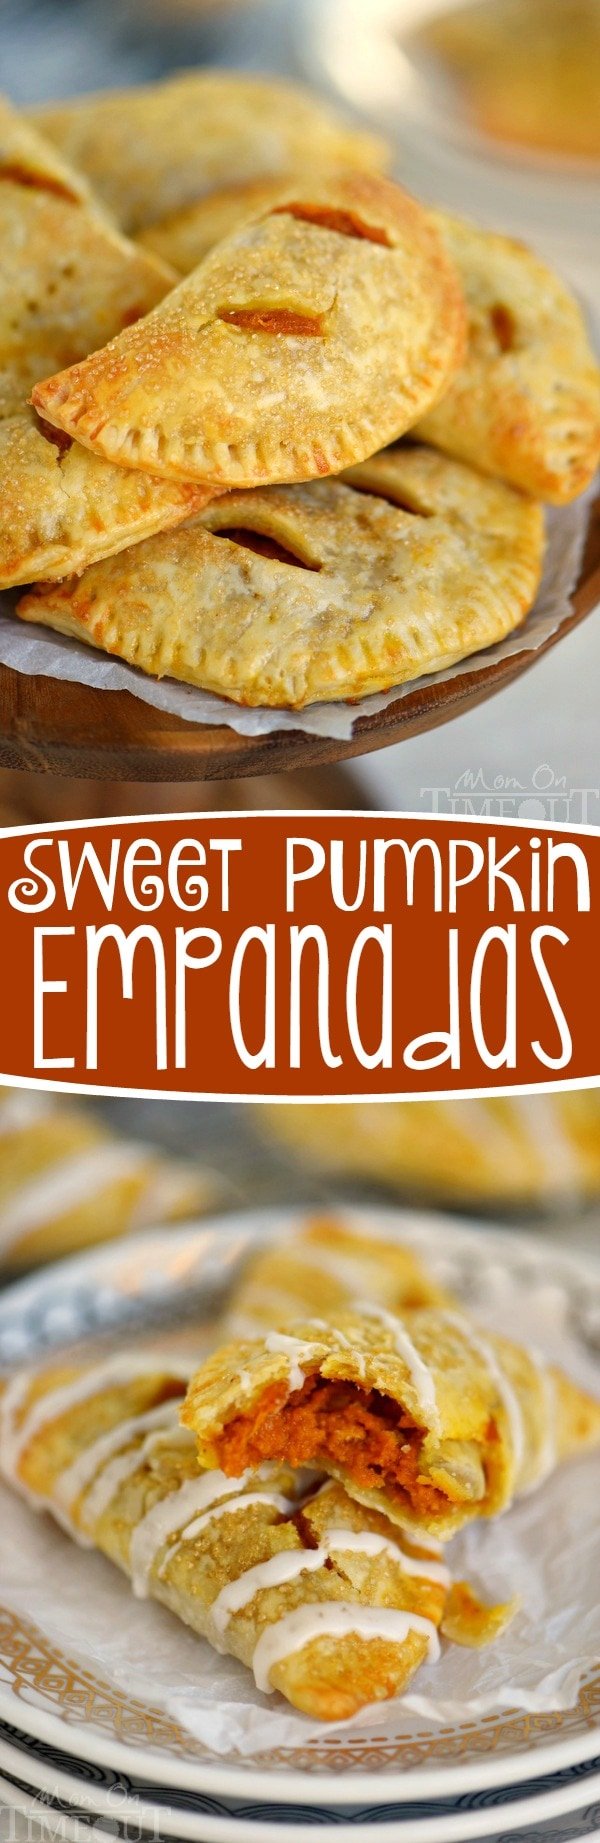 Welcome to your new favorite dessert. These Sweet Pumpkin Empanadas are better than any pumpkin pie you've ever had and are perfect for parties! The filling will blow your mind!